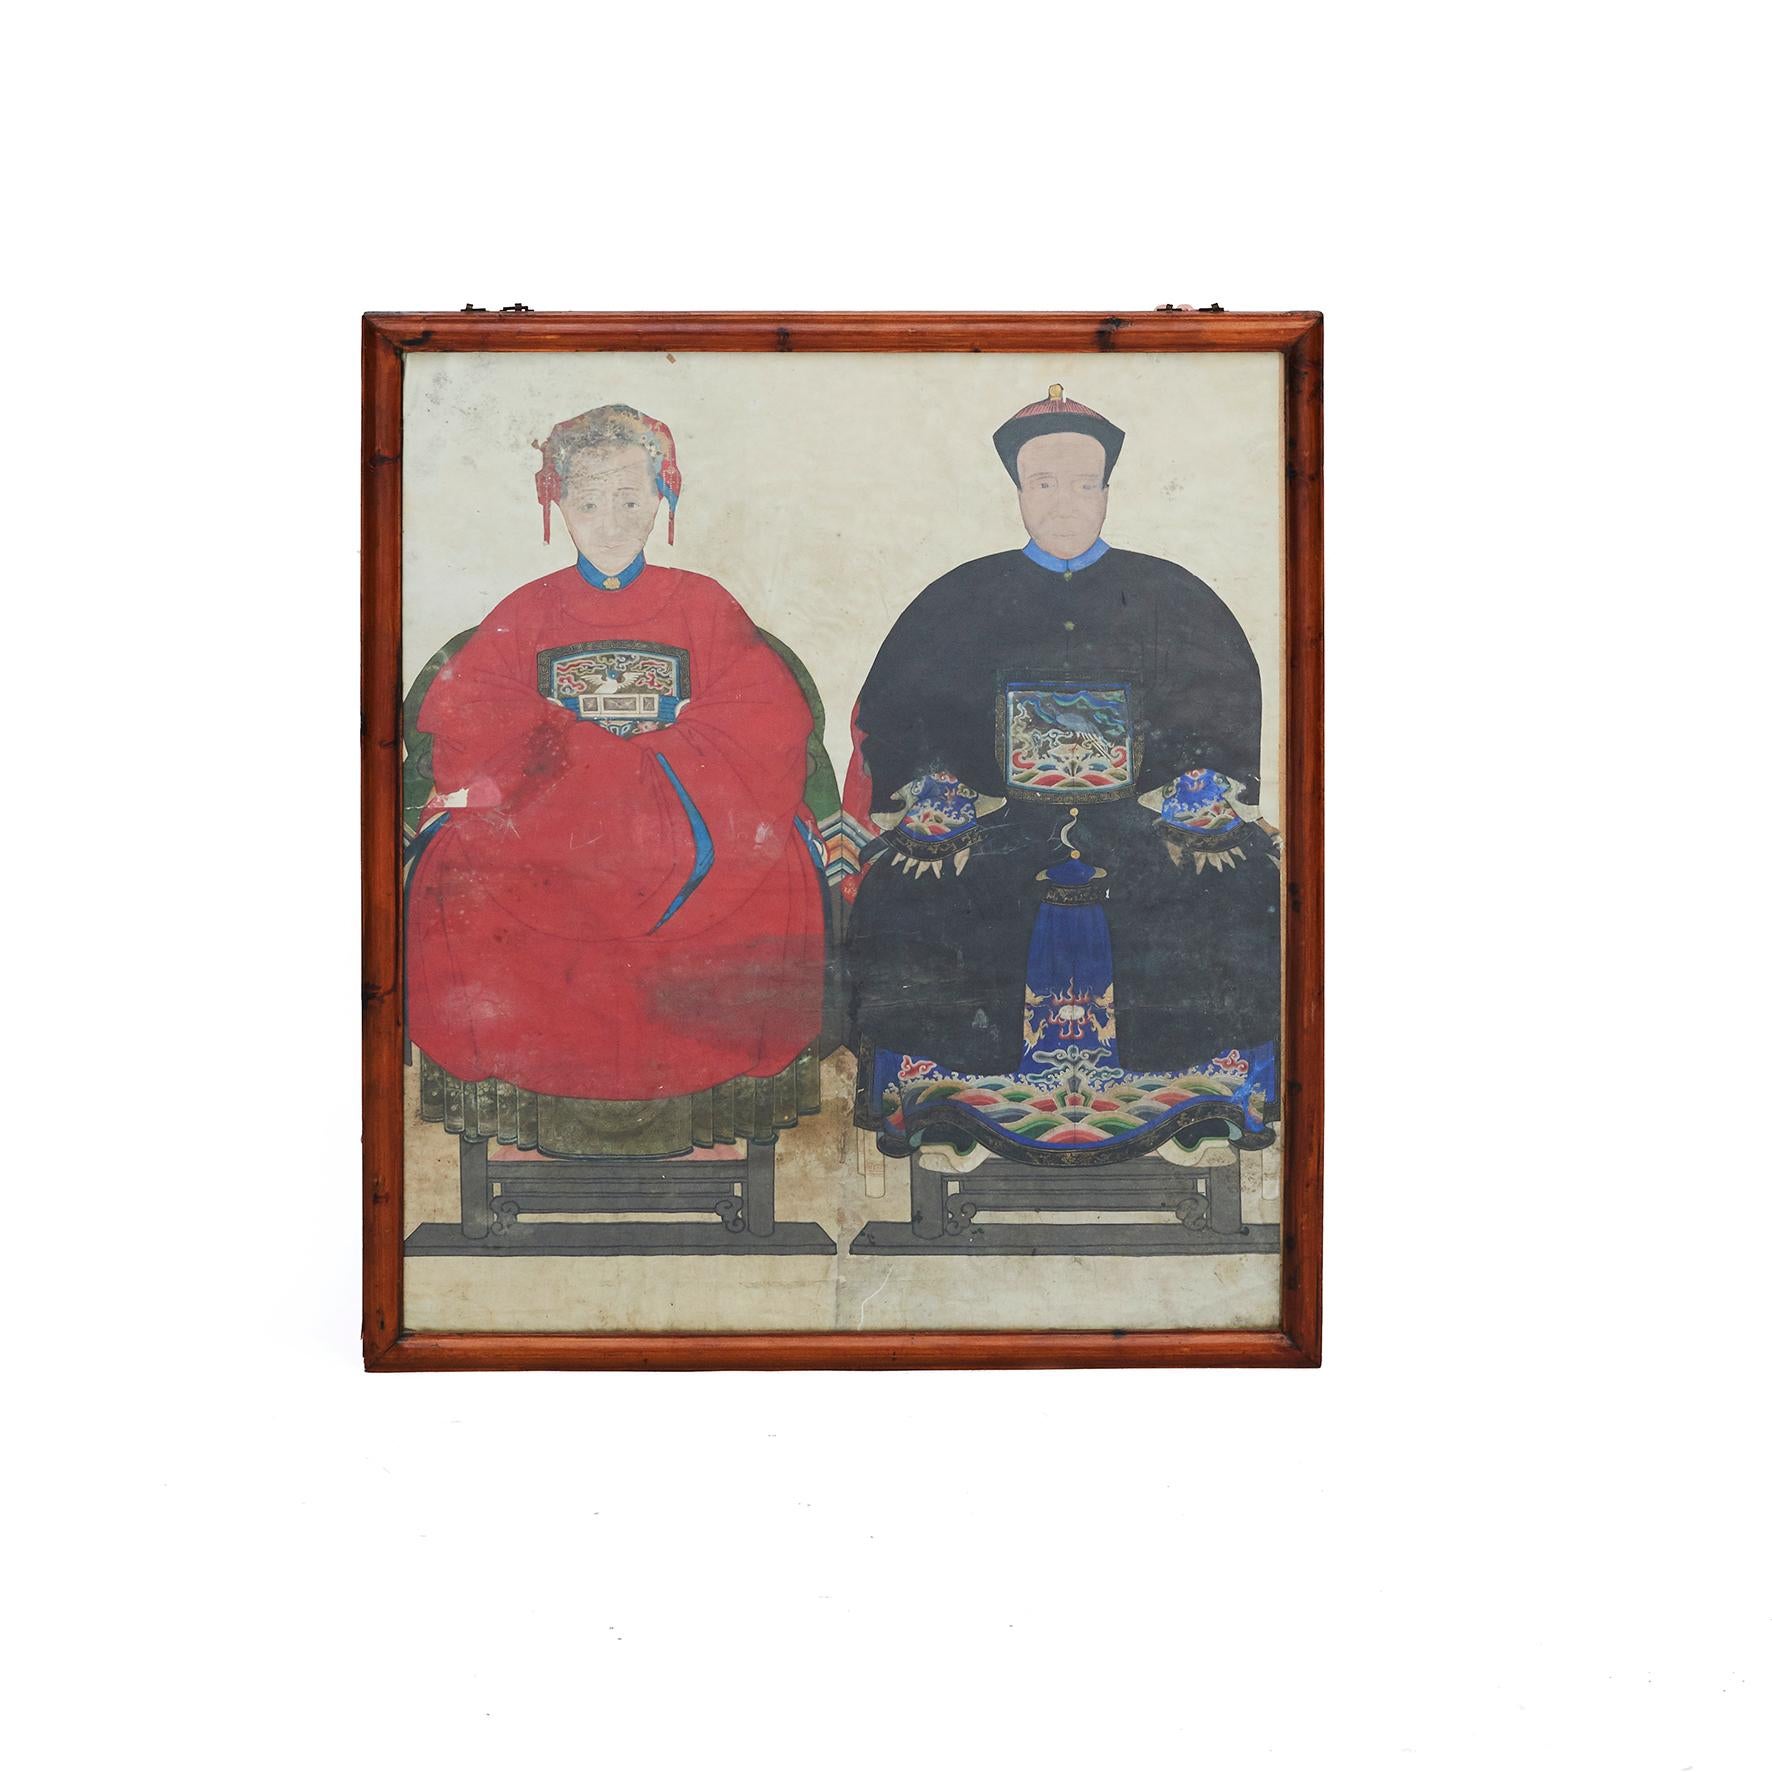 Chinese Ancestor portrait of a mandarin with his first wife. Polychrome gouache on paper, made in quality with many details.
Dimensions with out frame: H: 108, W: 100 cm.

Original frame in cypress wood with glass.
China mid 19th century, Qing